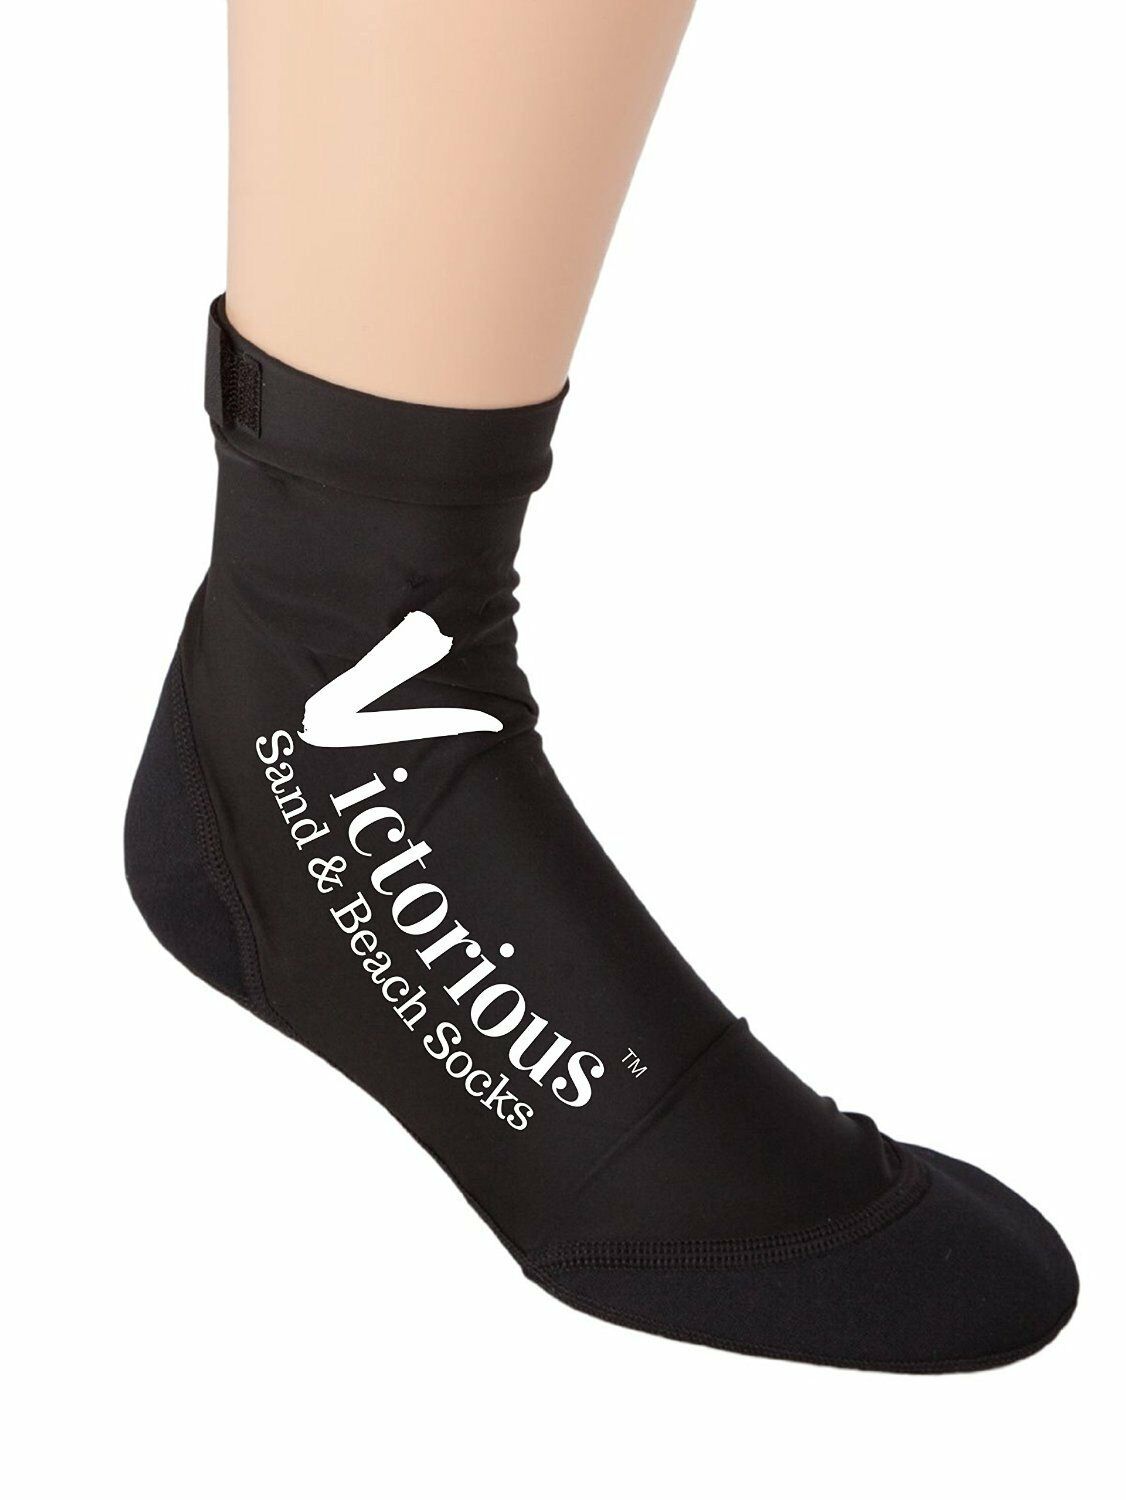 Unisex - Beach Socks - Wear In Sand, Playing Volleyball, Soccer And More